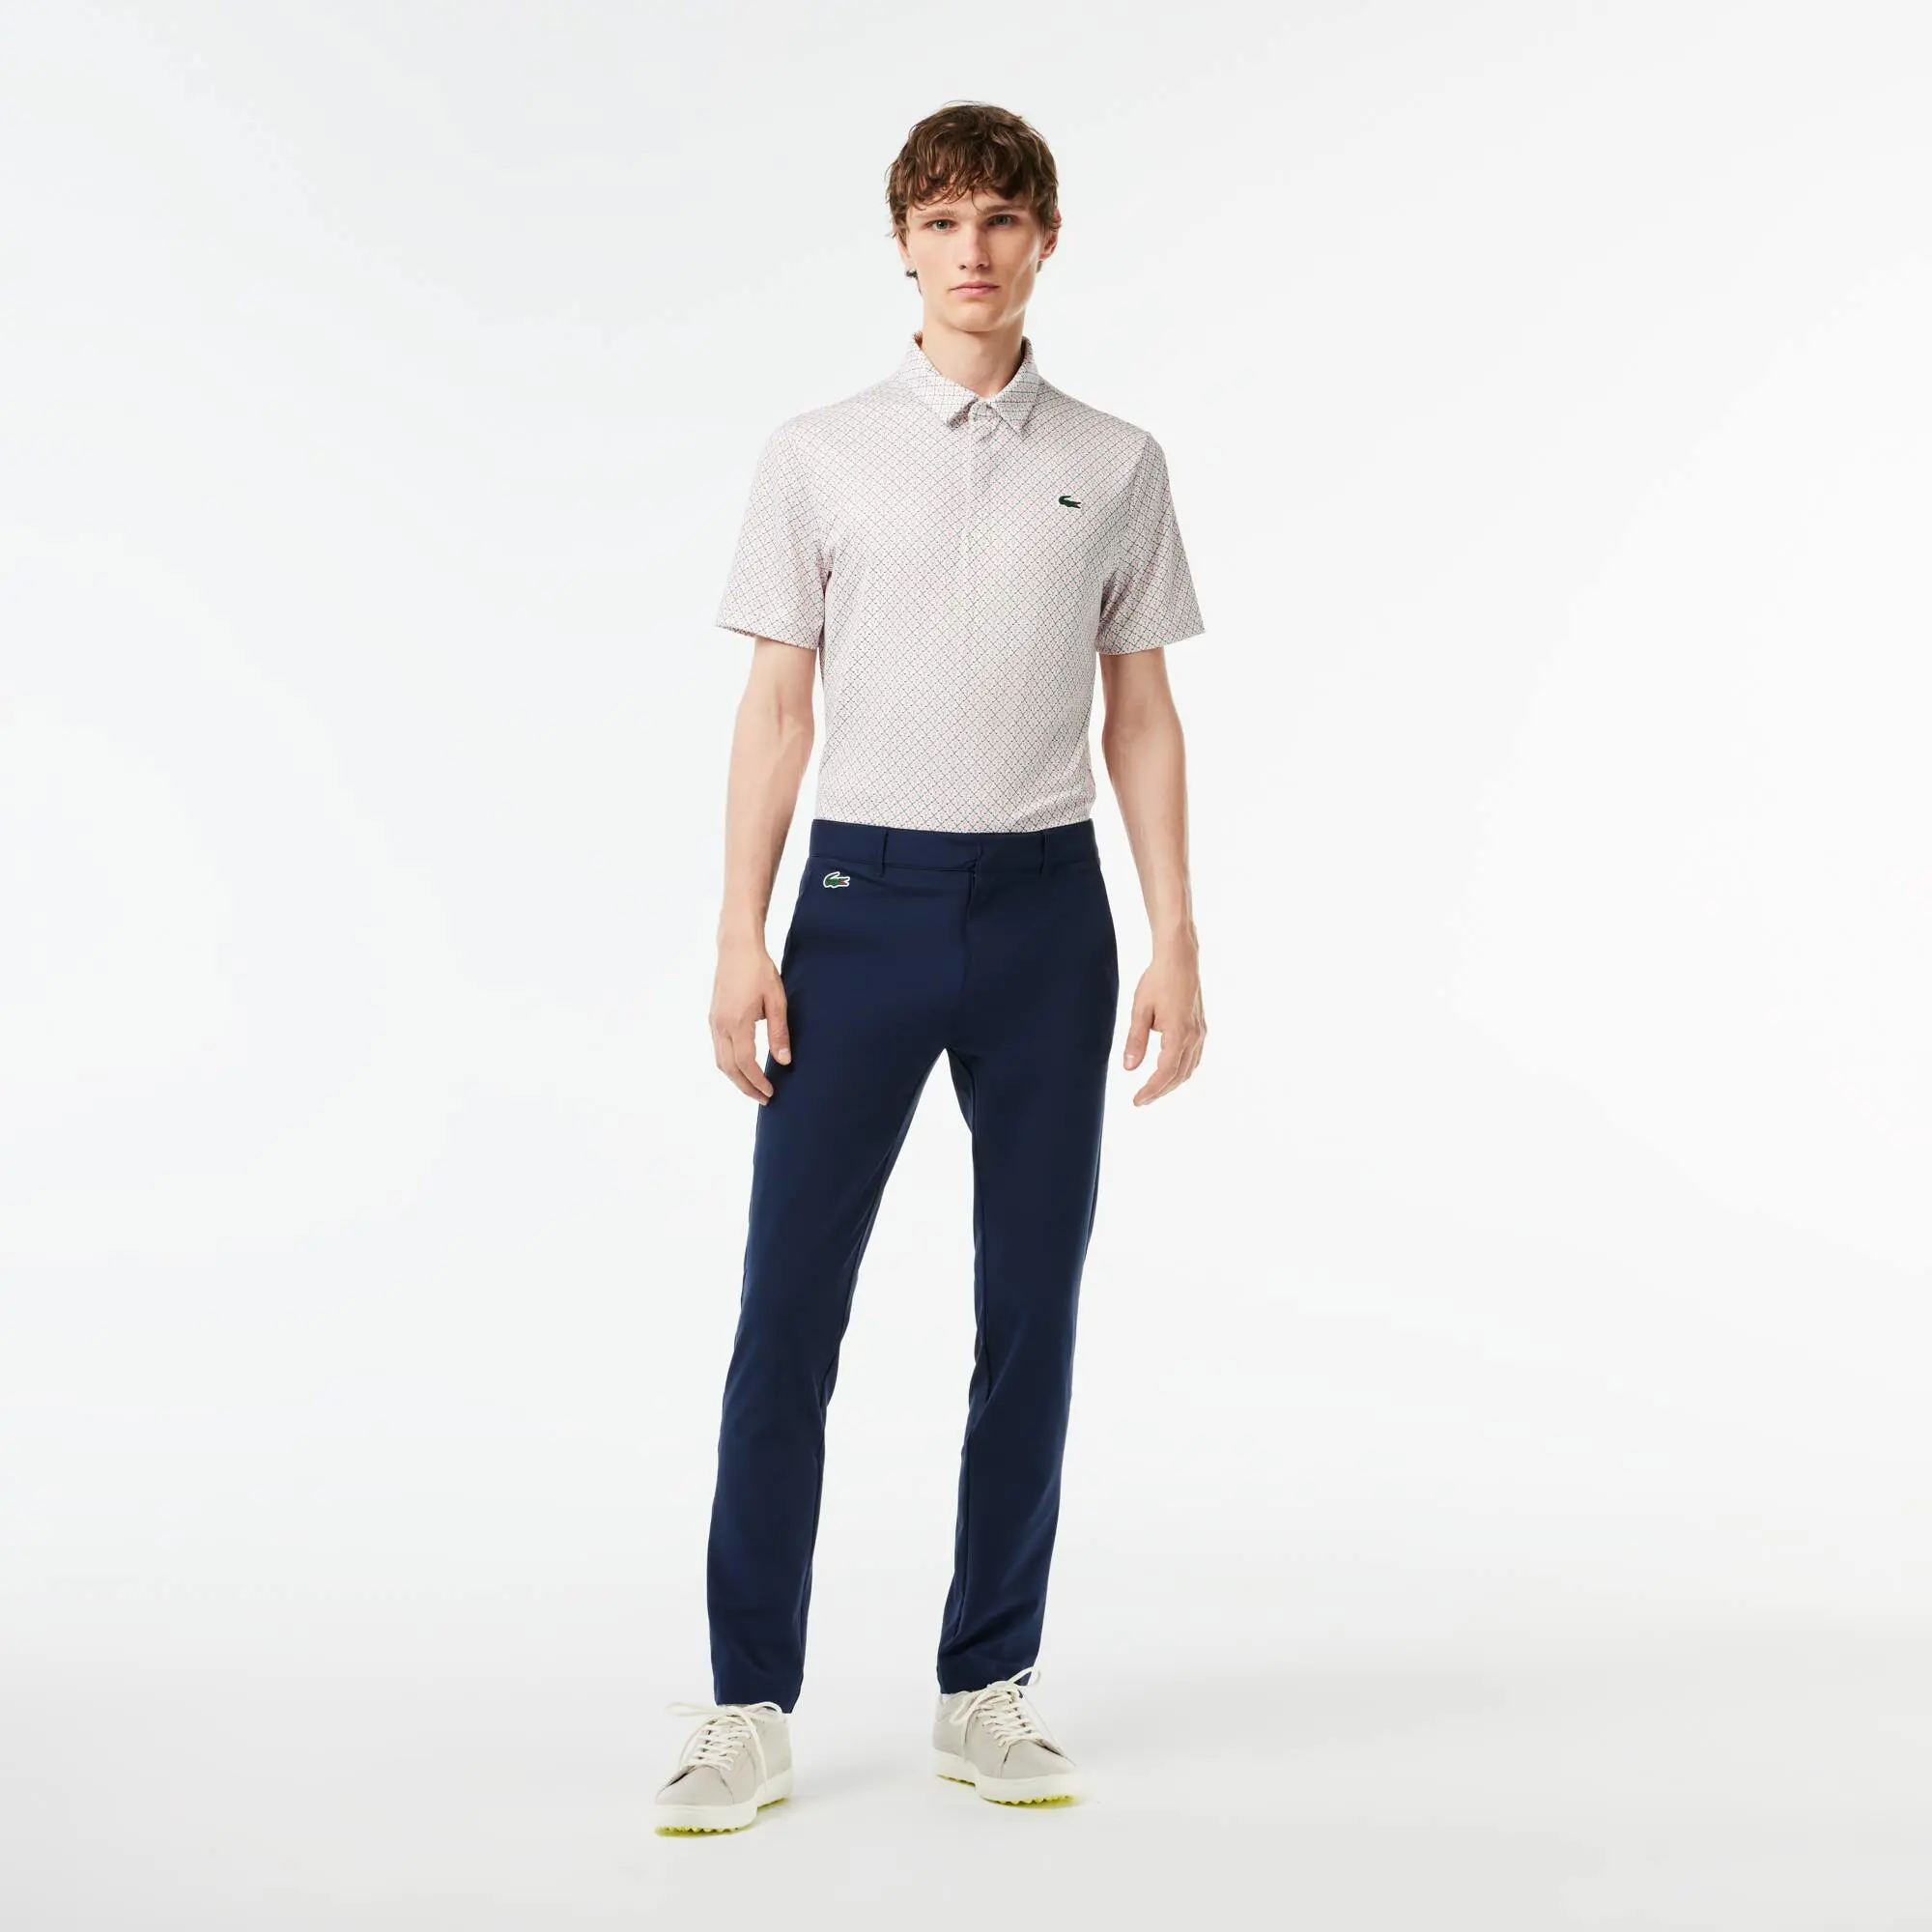 Lacoste Slim Fit Absorbent Twill Golf Pants. 1